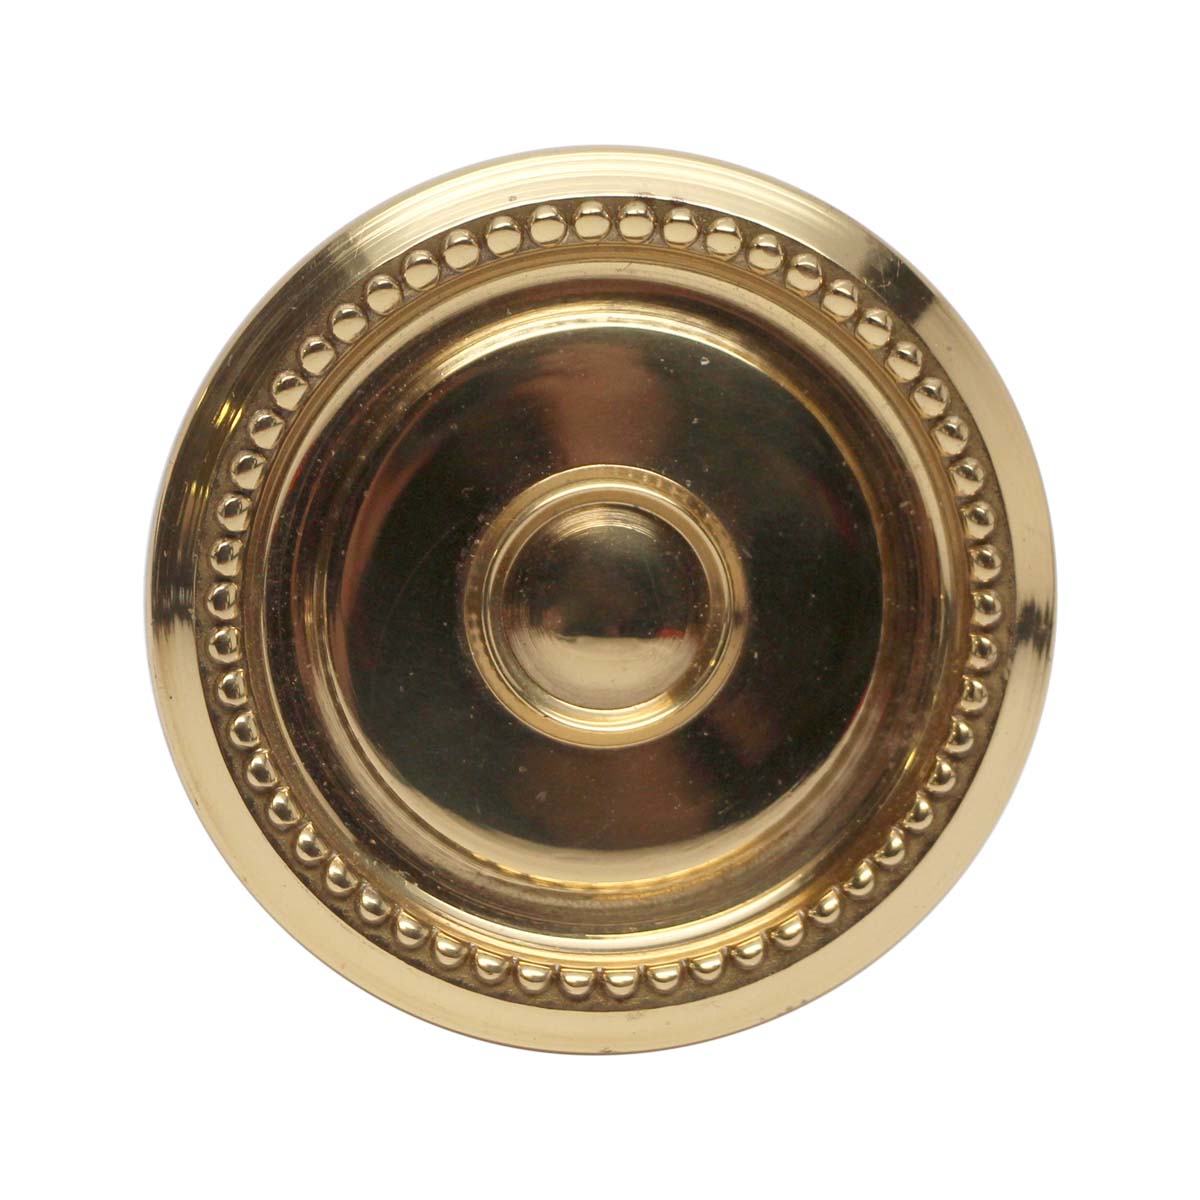 Vintage Polished Brass Beaded Concentric Entry Door Knob | Olde Good Things